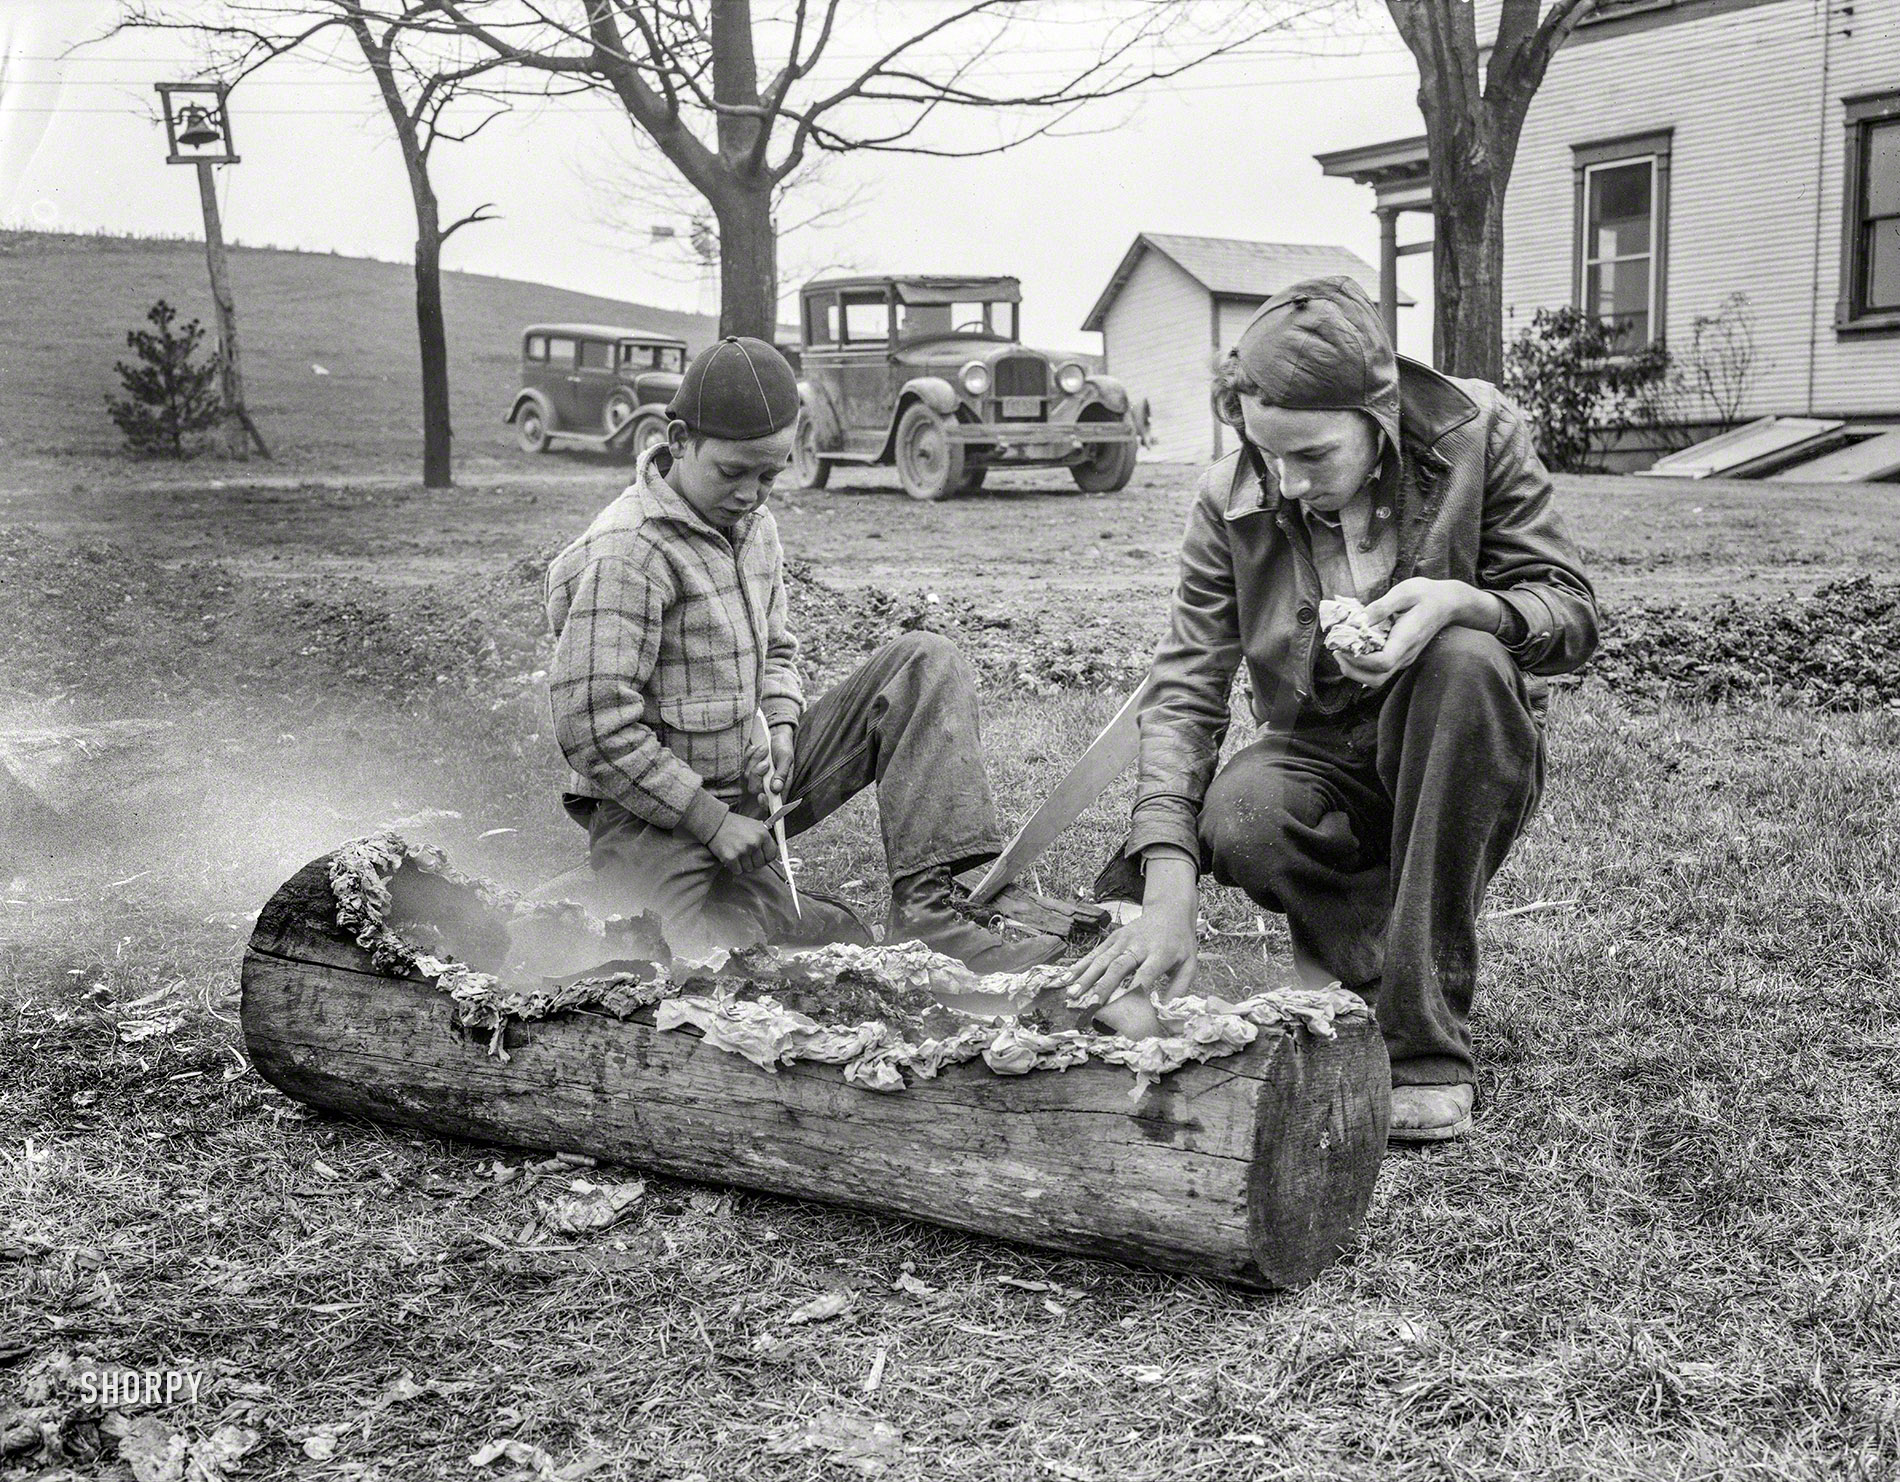 April 1935. "Boys smoking log. Reedsville, West Virginia." Back before transistors or whatever made these portable. 4x5 nitrate negative by Elmer Johnson for the Resettlement Administration. View full size.